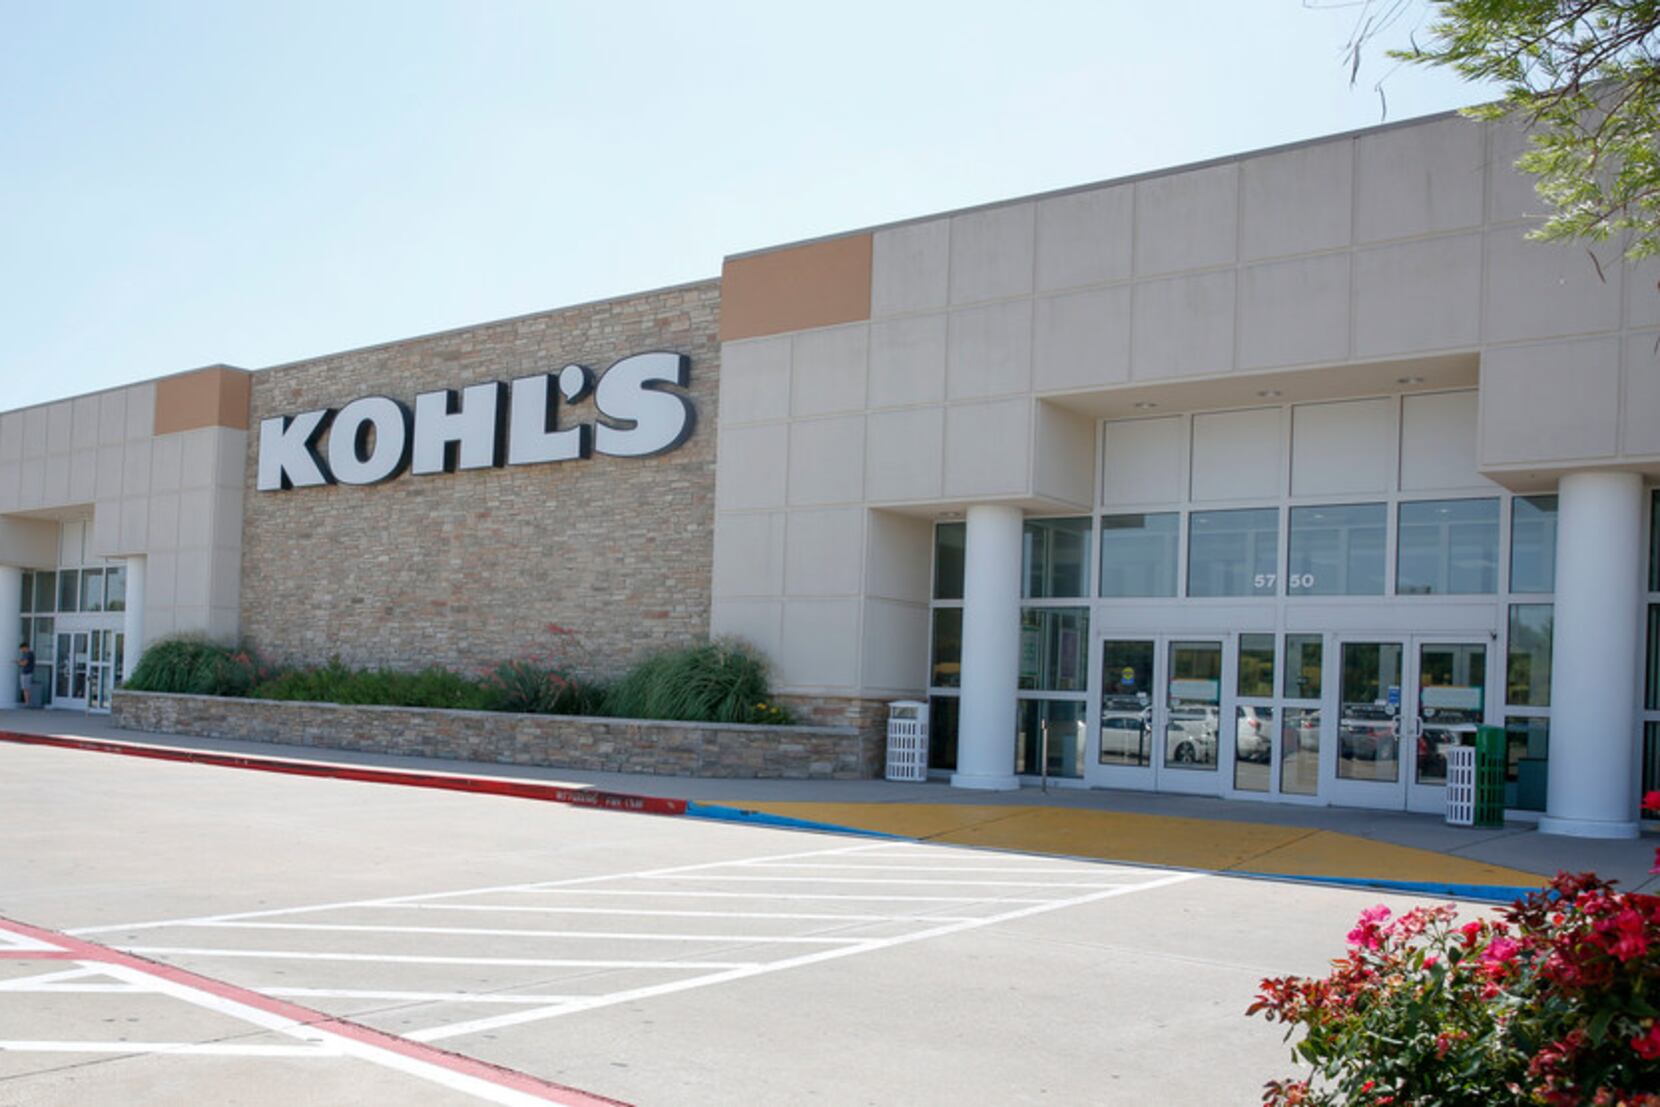 Is Kohl's New Strategy Merely A Slightly Better Version Of Mediocre?